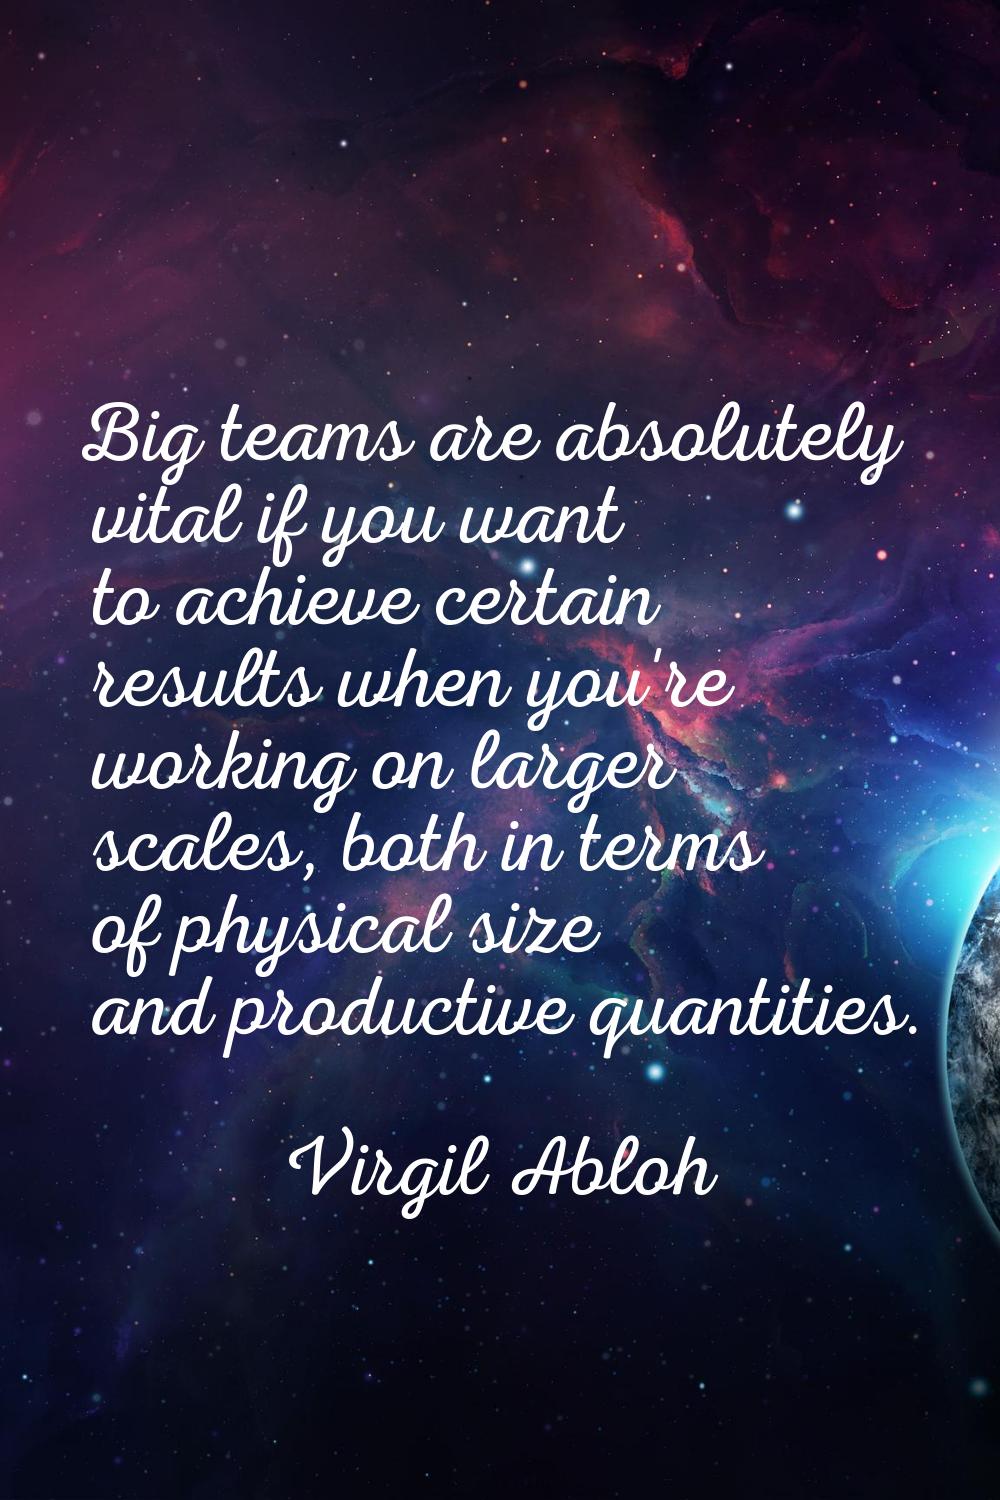 Big teams are absolutely vital if you want to achieve certain results when you're working on larger